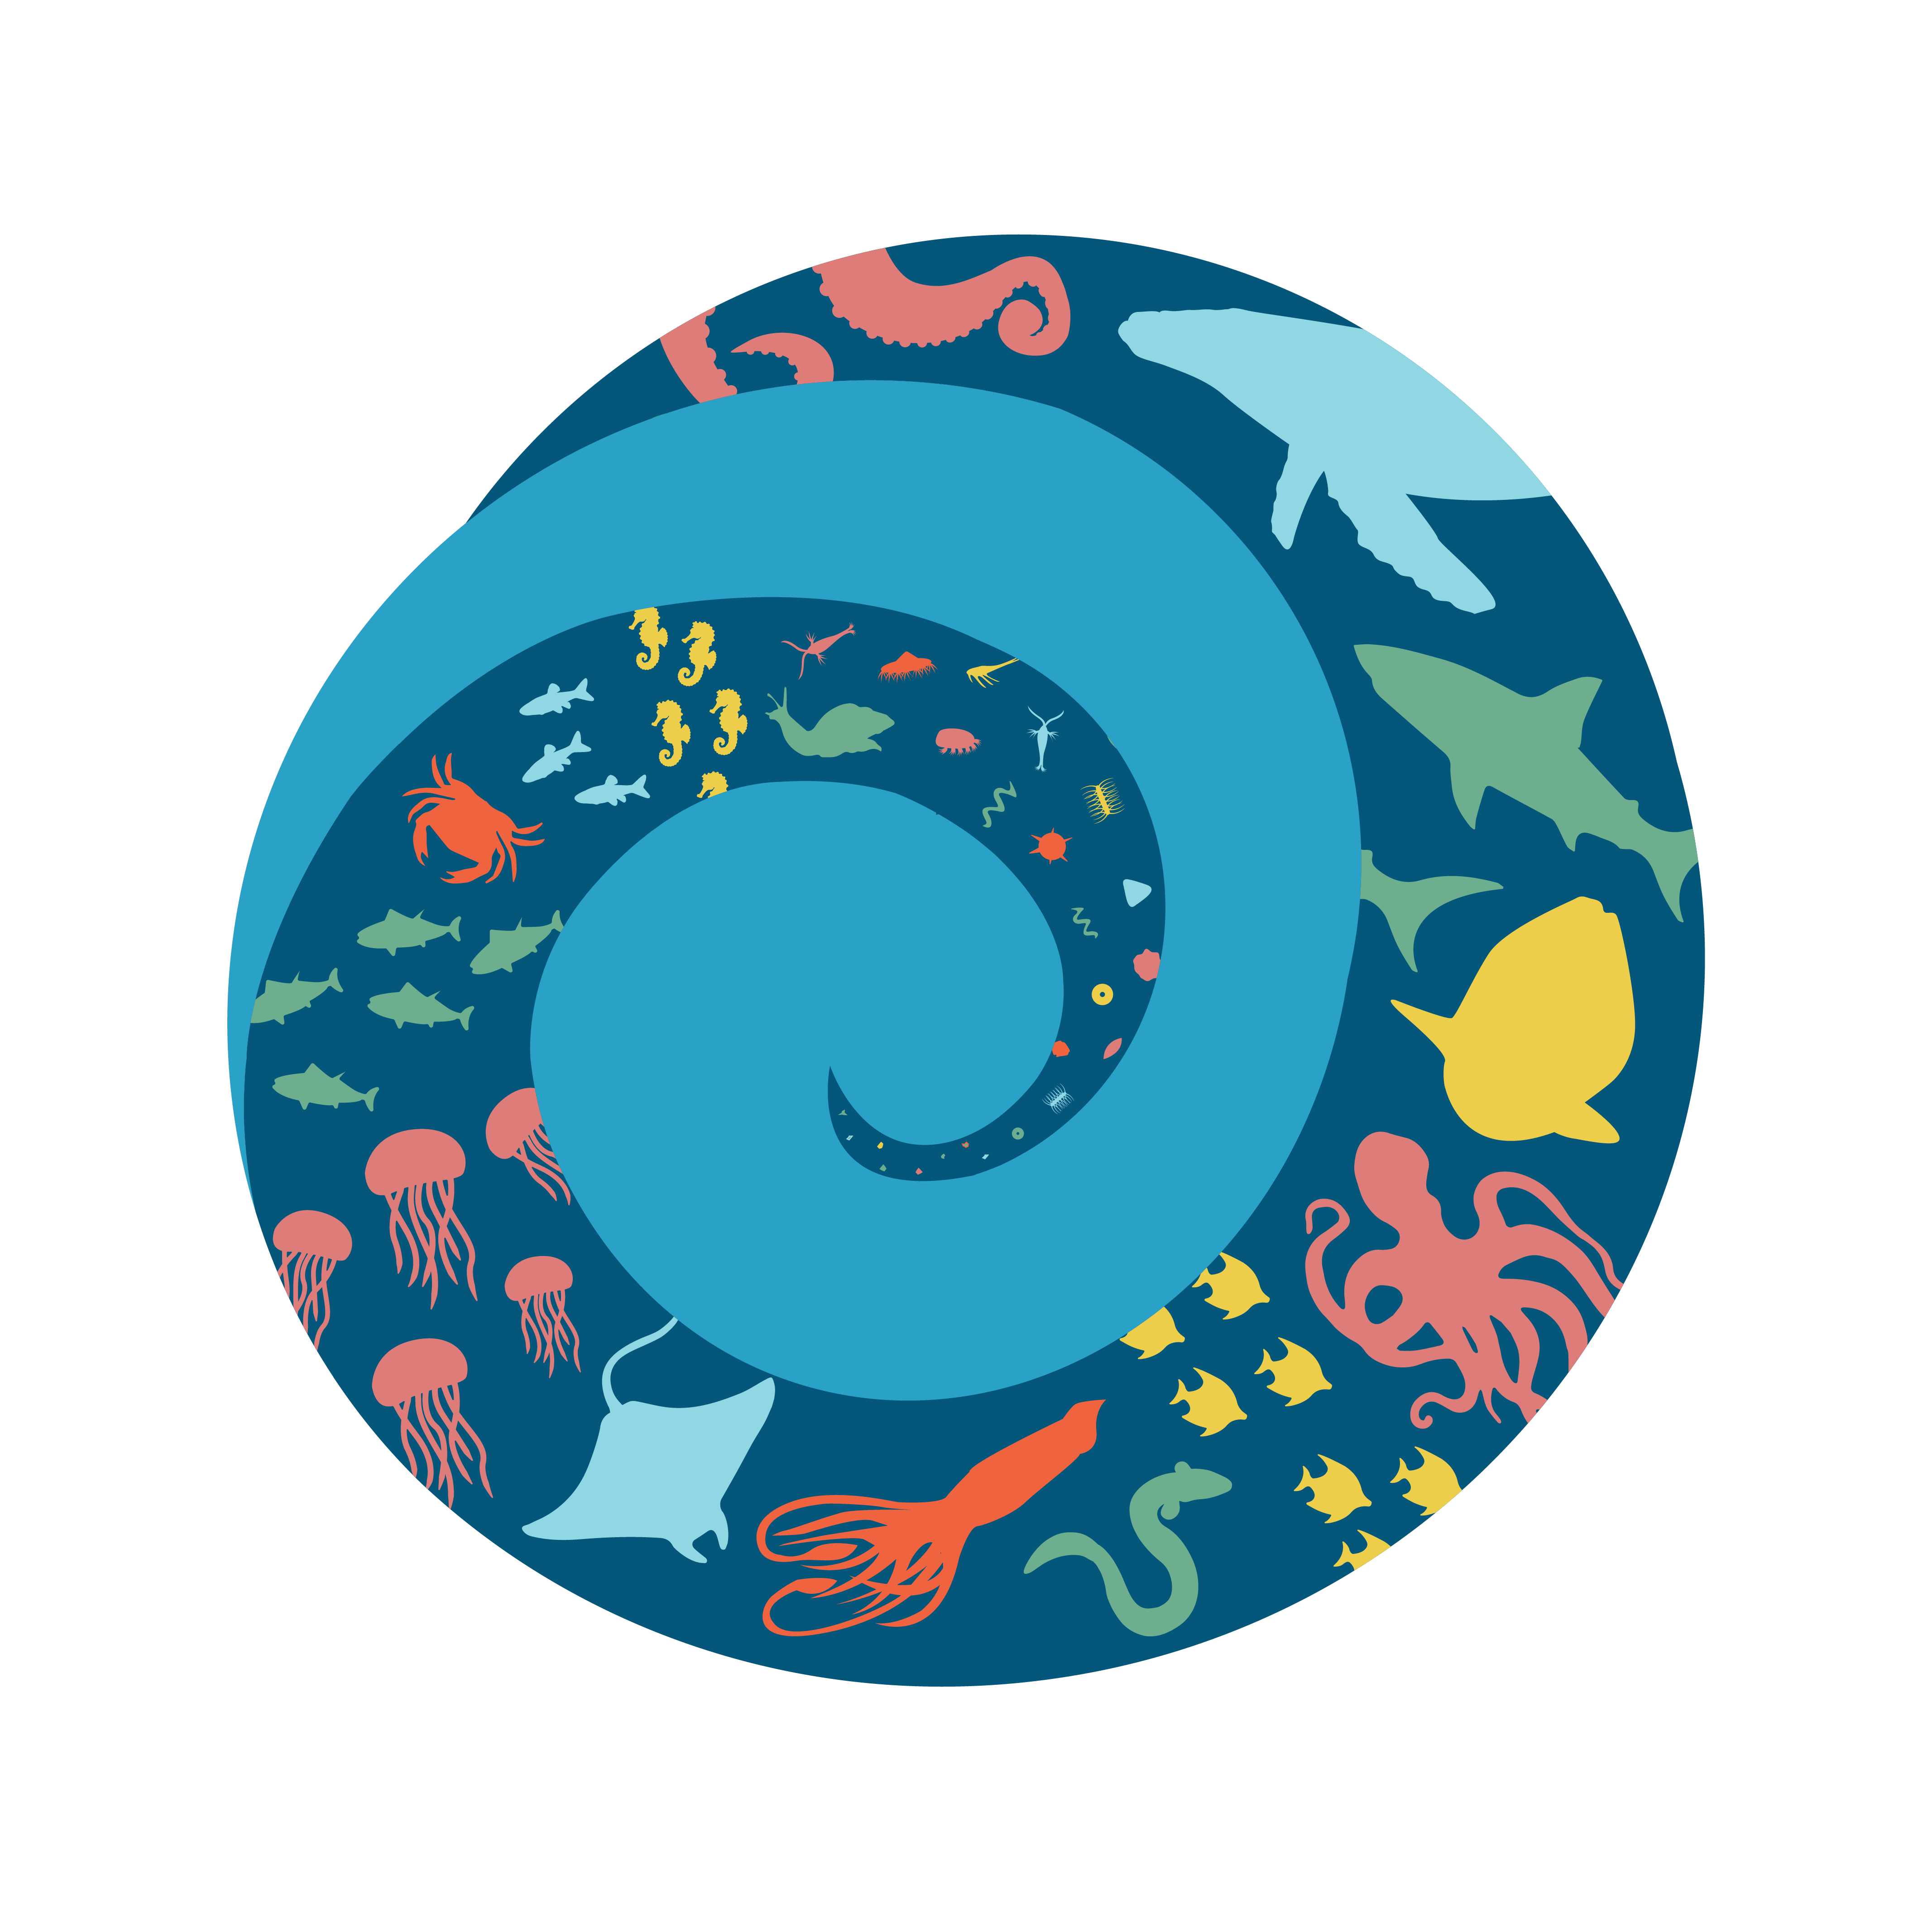 A graphic of a spiral featuring different forms of ocean life, including phytoplankton, shrimp, crabs, squid, sharks, octopuses, and more.